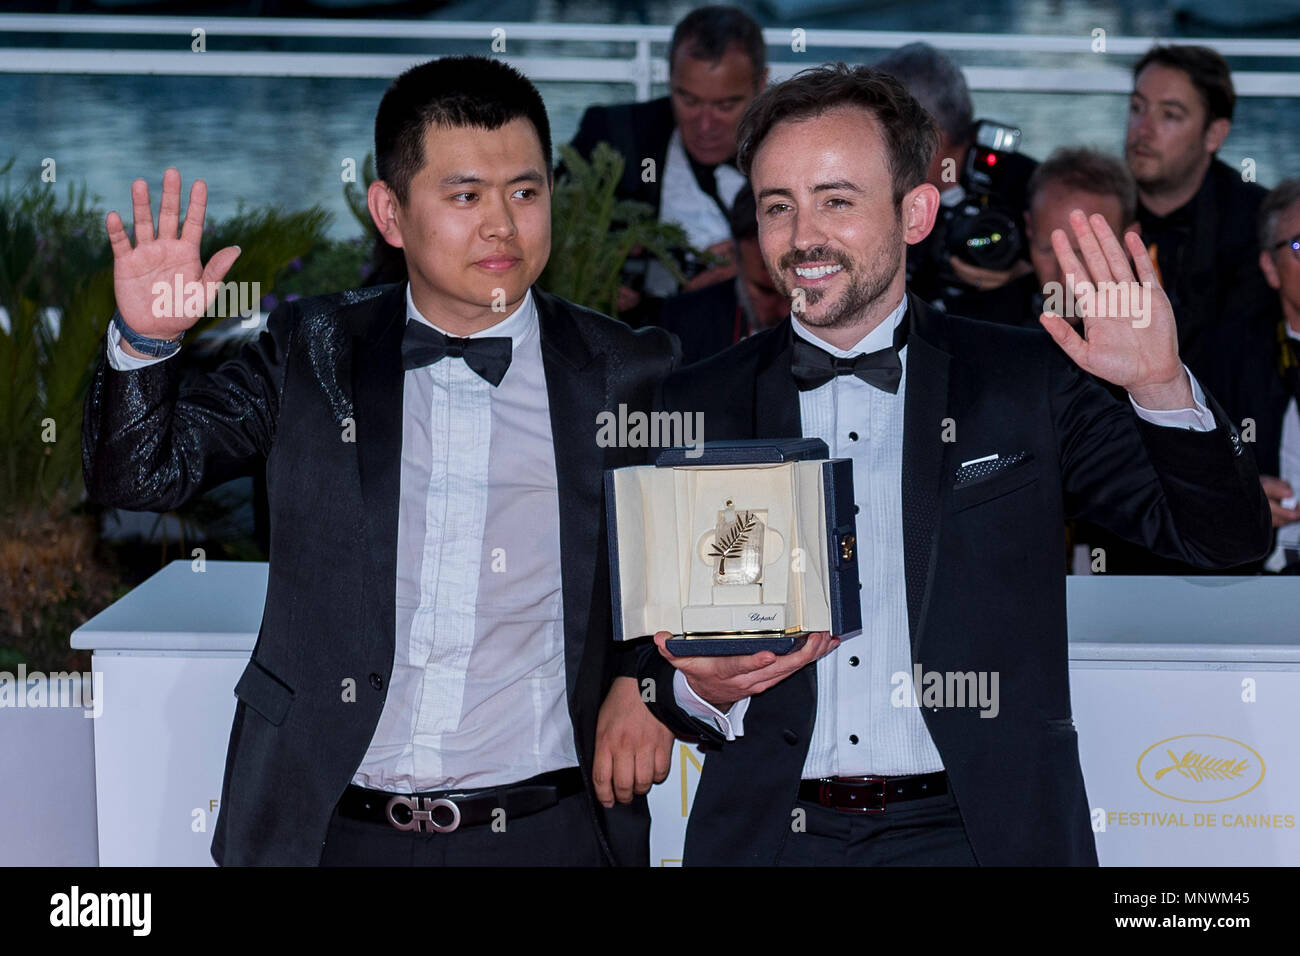 Cannes, France. 19th May 2018. Australian director Charles Williams, short  film Palm d'Or award winner for his film 'All These Creatures' poses with  Wei Shujun special mention award winner for his film '